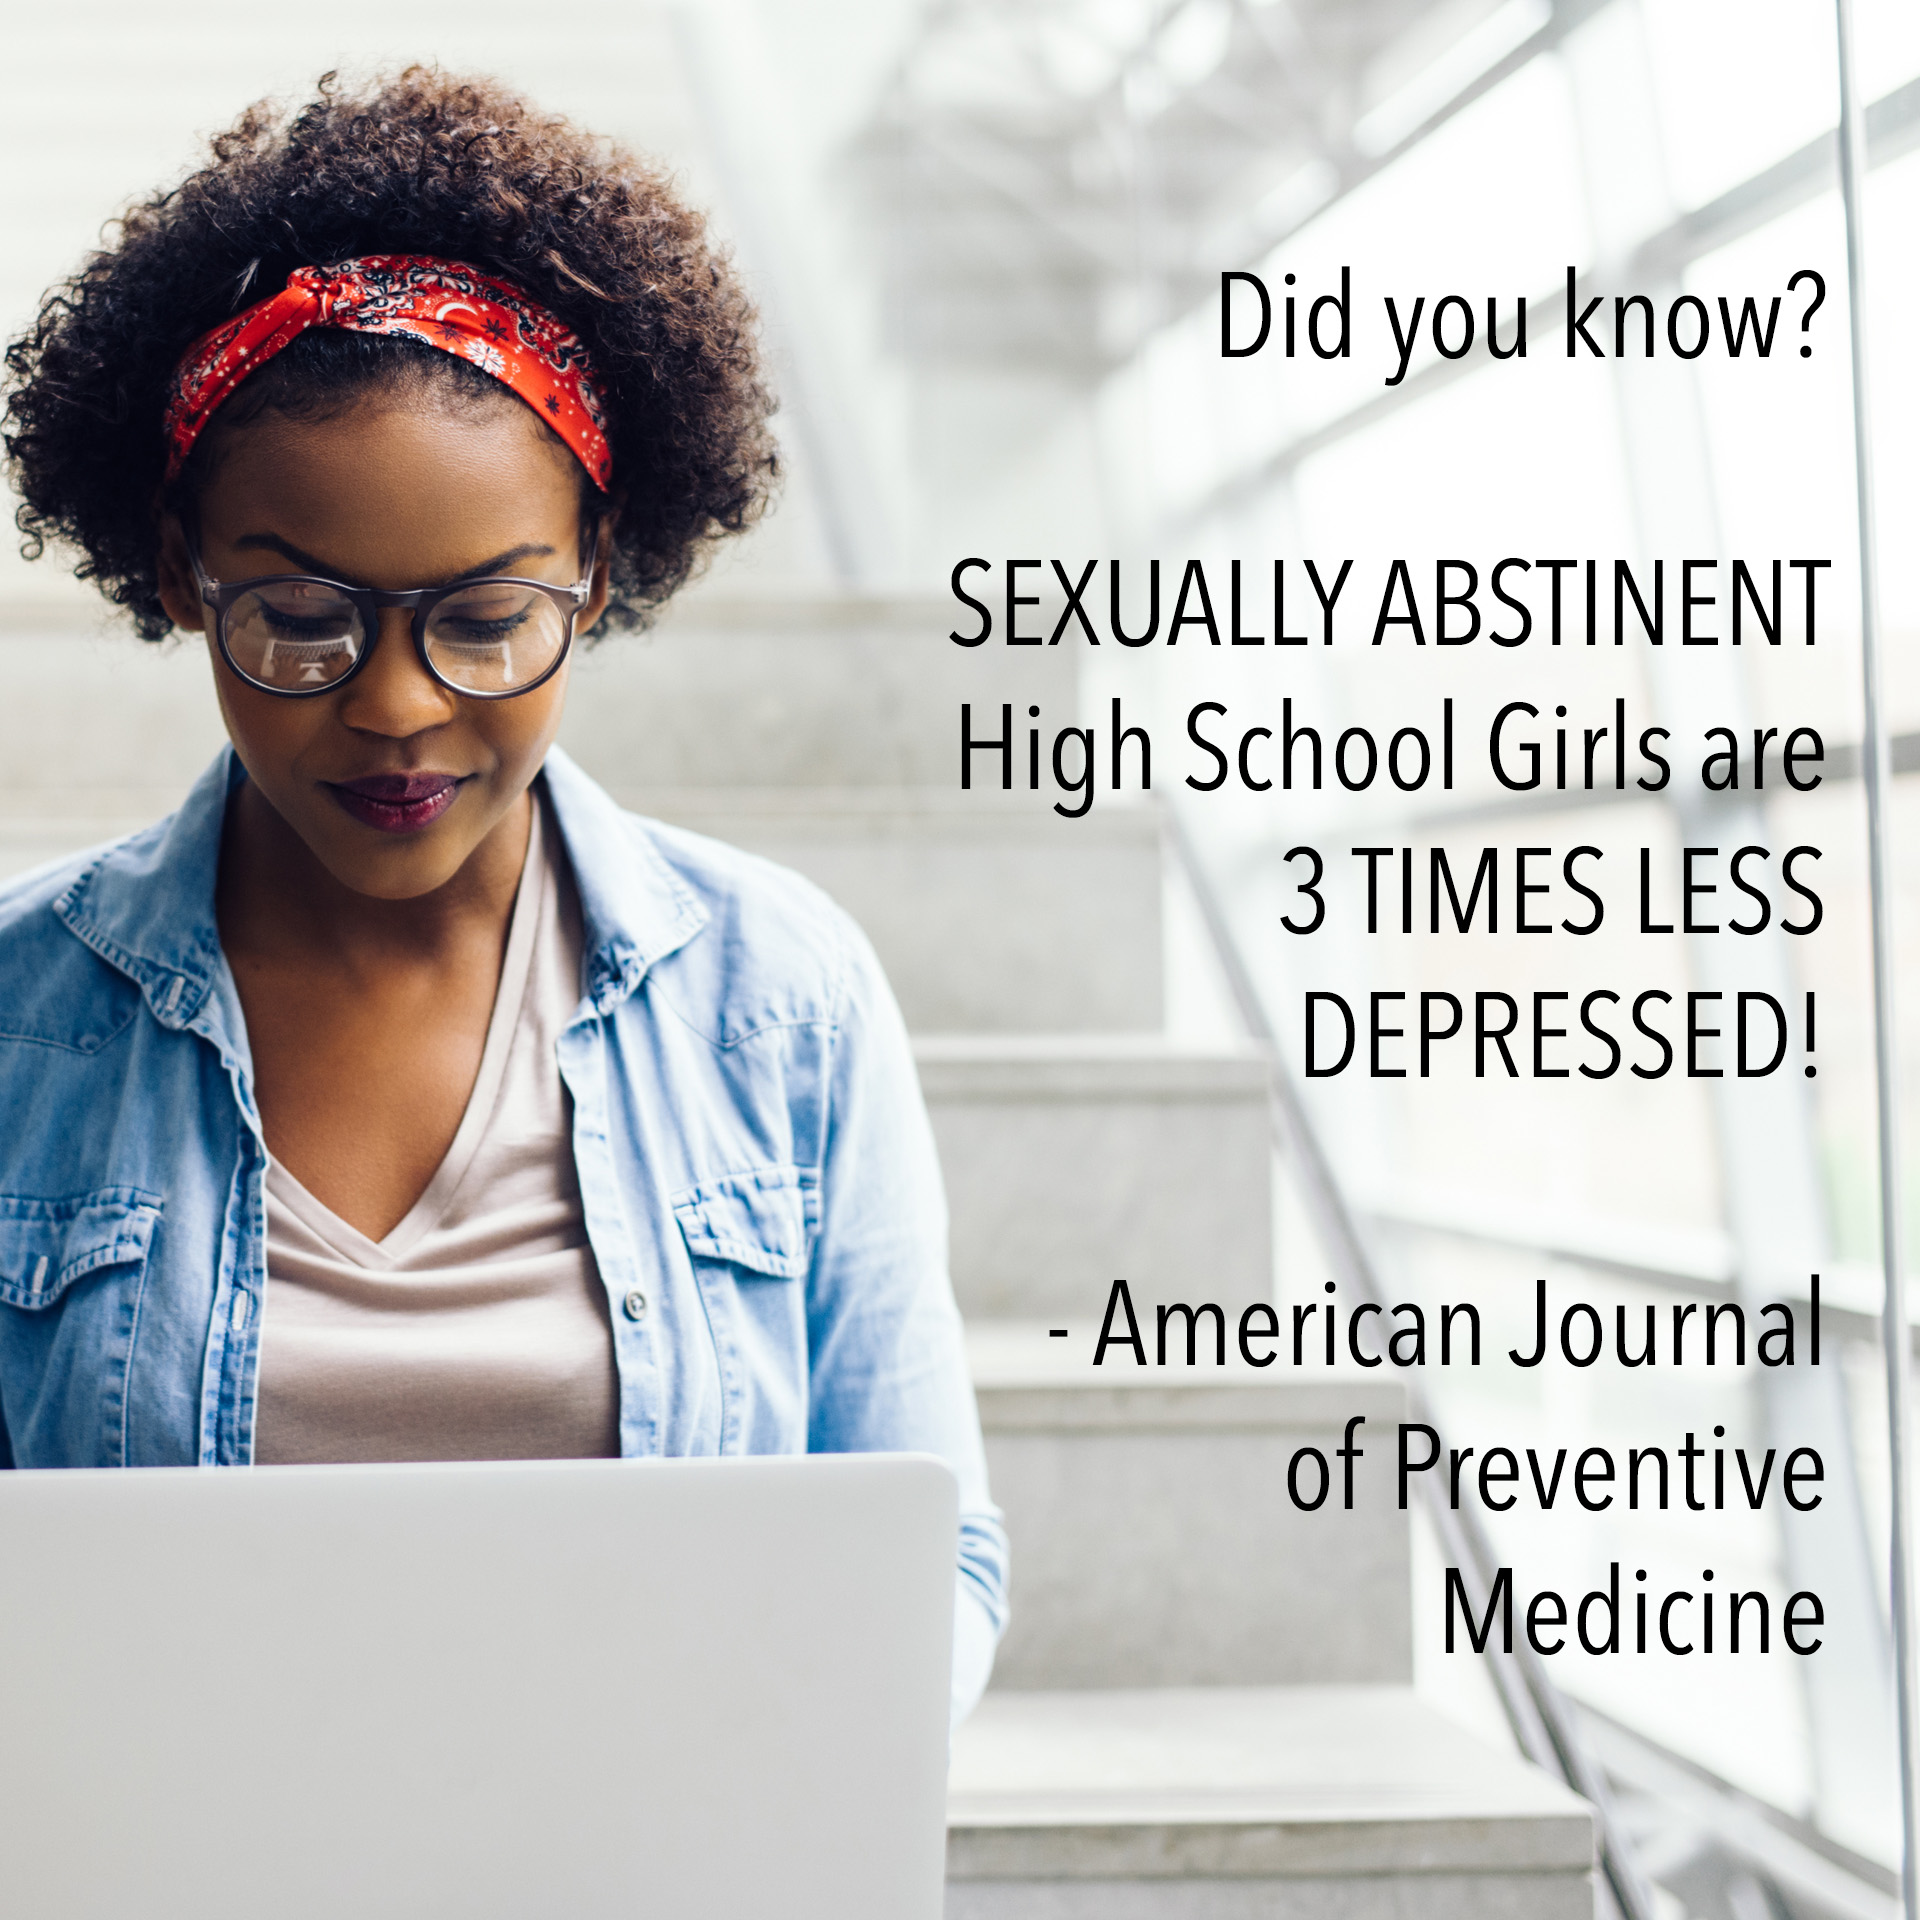 Did you know? SEXUALLY ABSTINENT High School Girls are 3 TIMES LESS DEPRESSED! - American Journal of Preventive Medicine